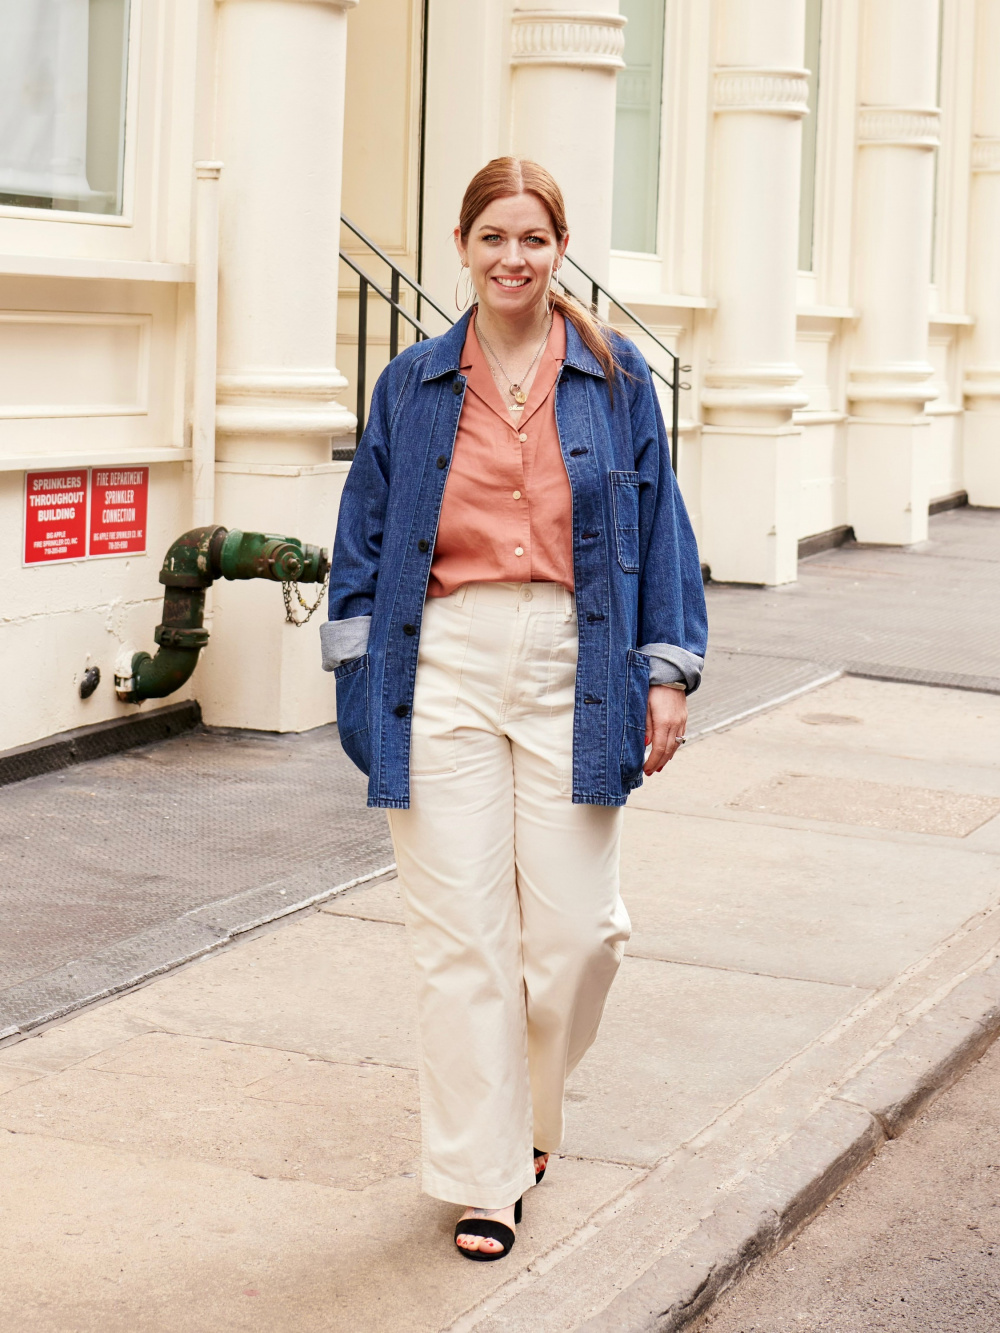 Check styling ideas for「BLOCKTECH Half Coat、Baker Pants」